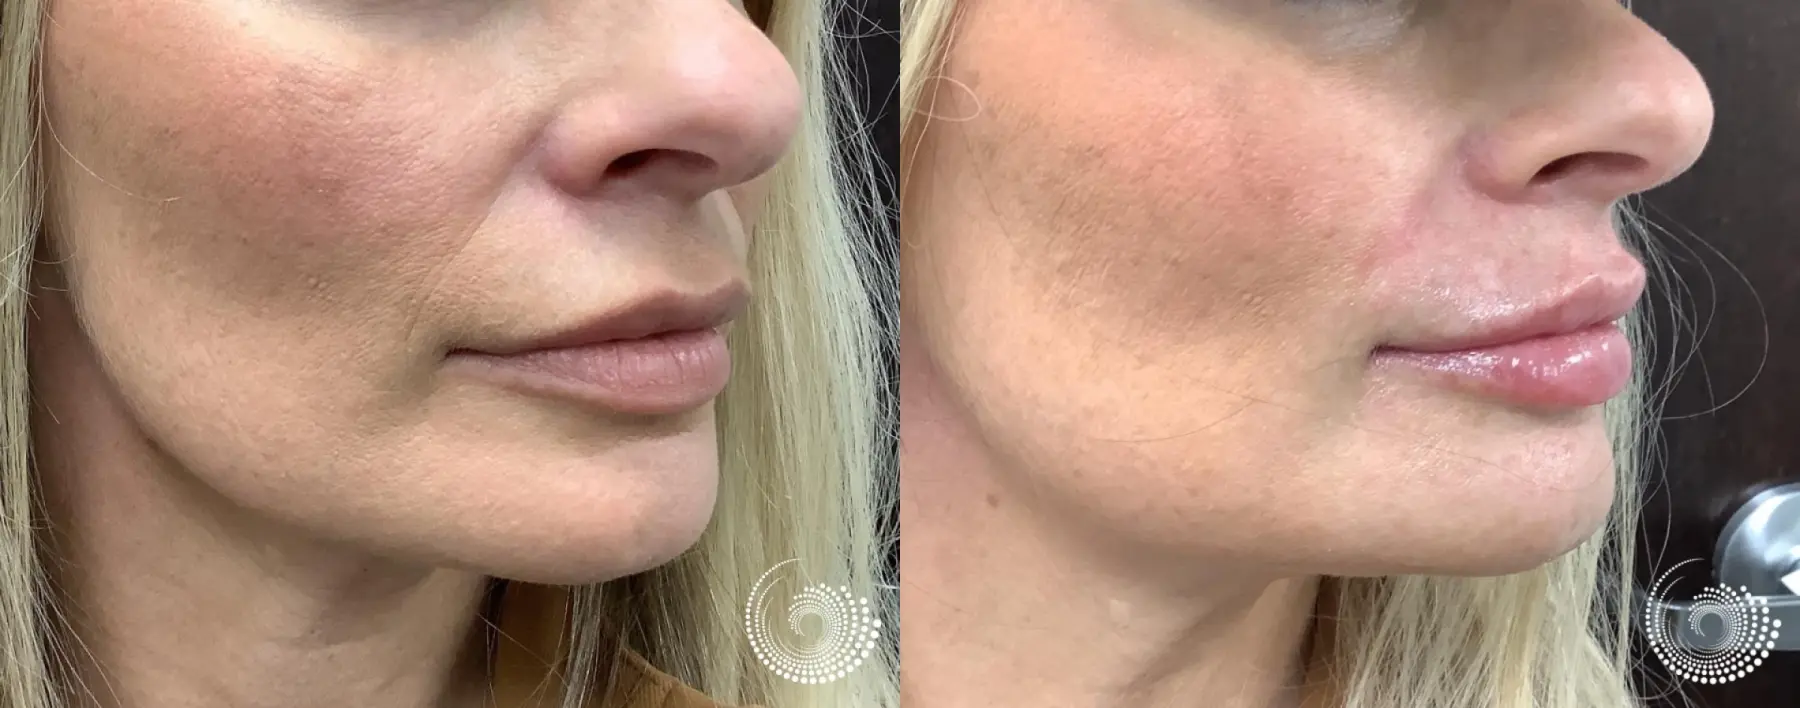 Cosmetic filler injections - vermillion lips and smile lines - Before and After 2